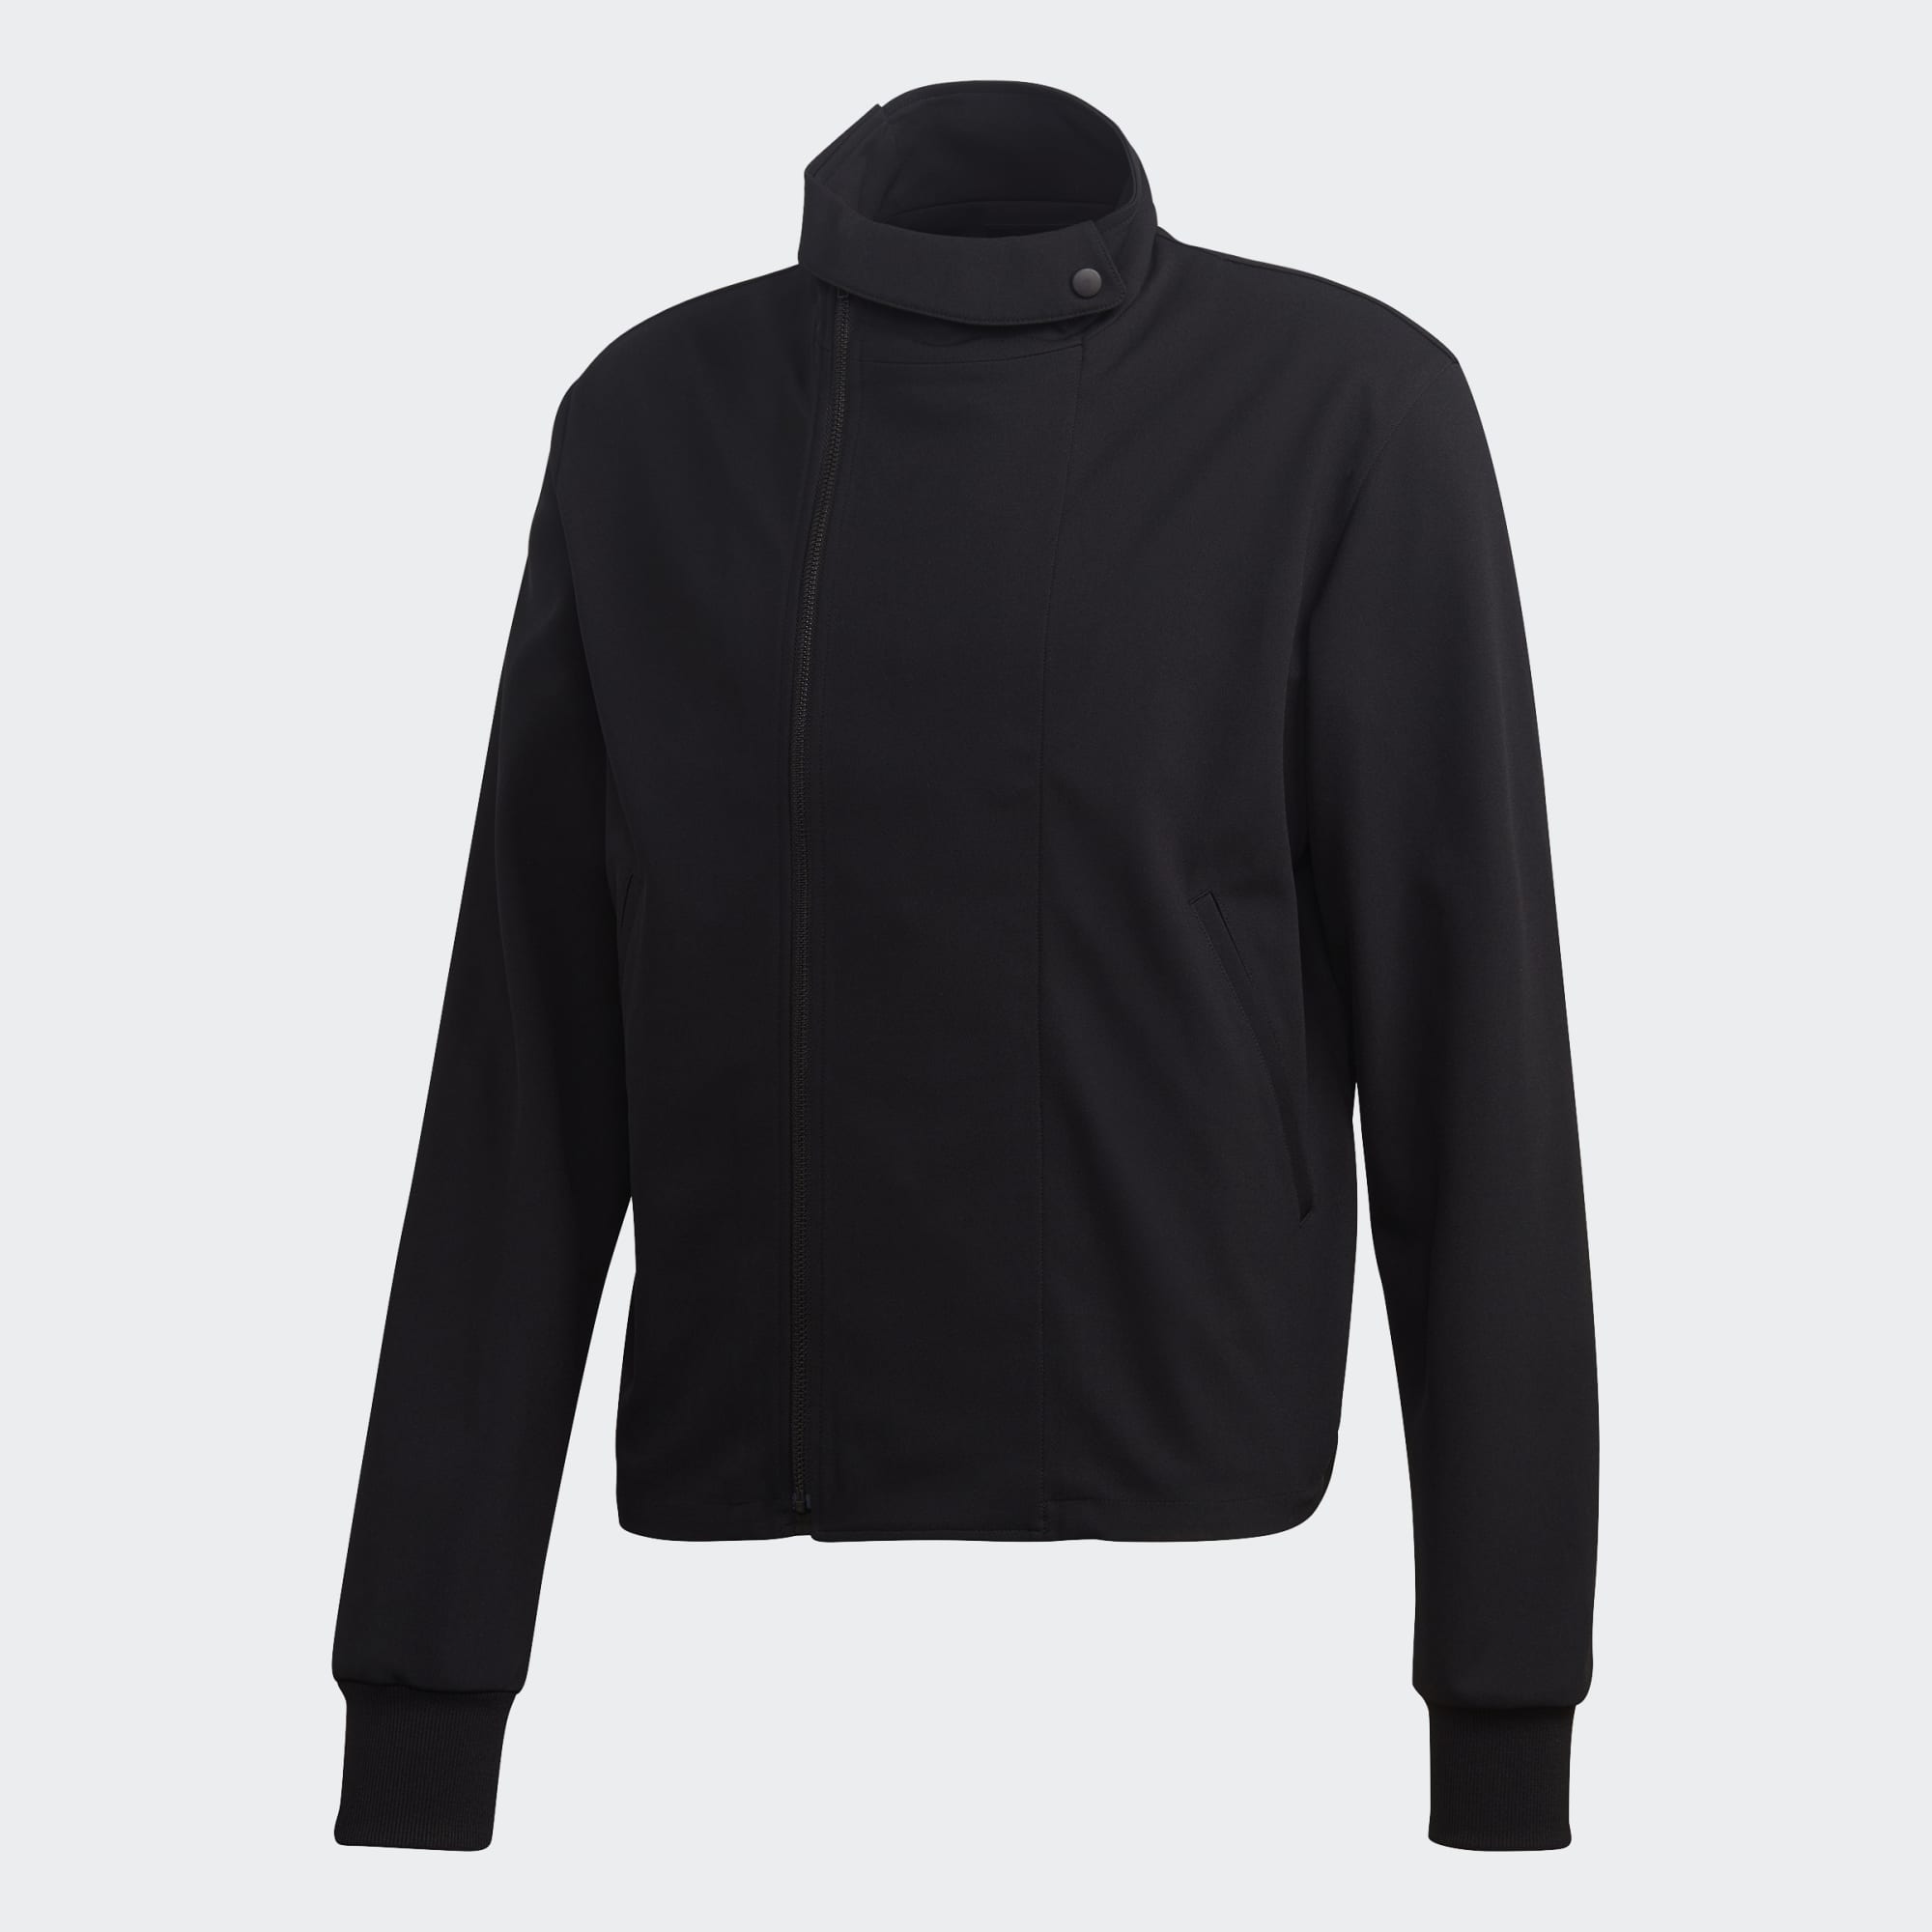 tradesports.co.uk Adidas Y-3 Men's Chapter 2 Trillion Track Top - Black